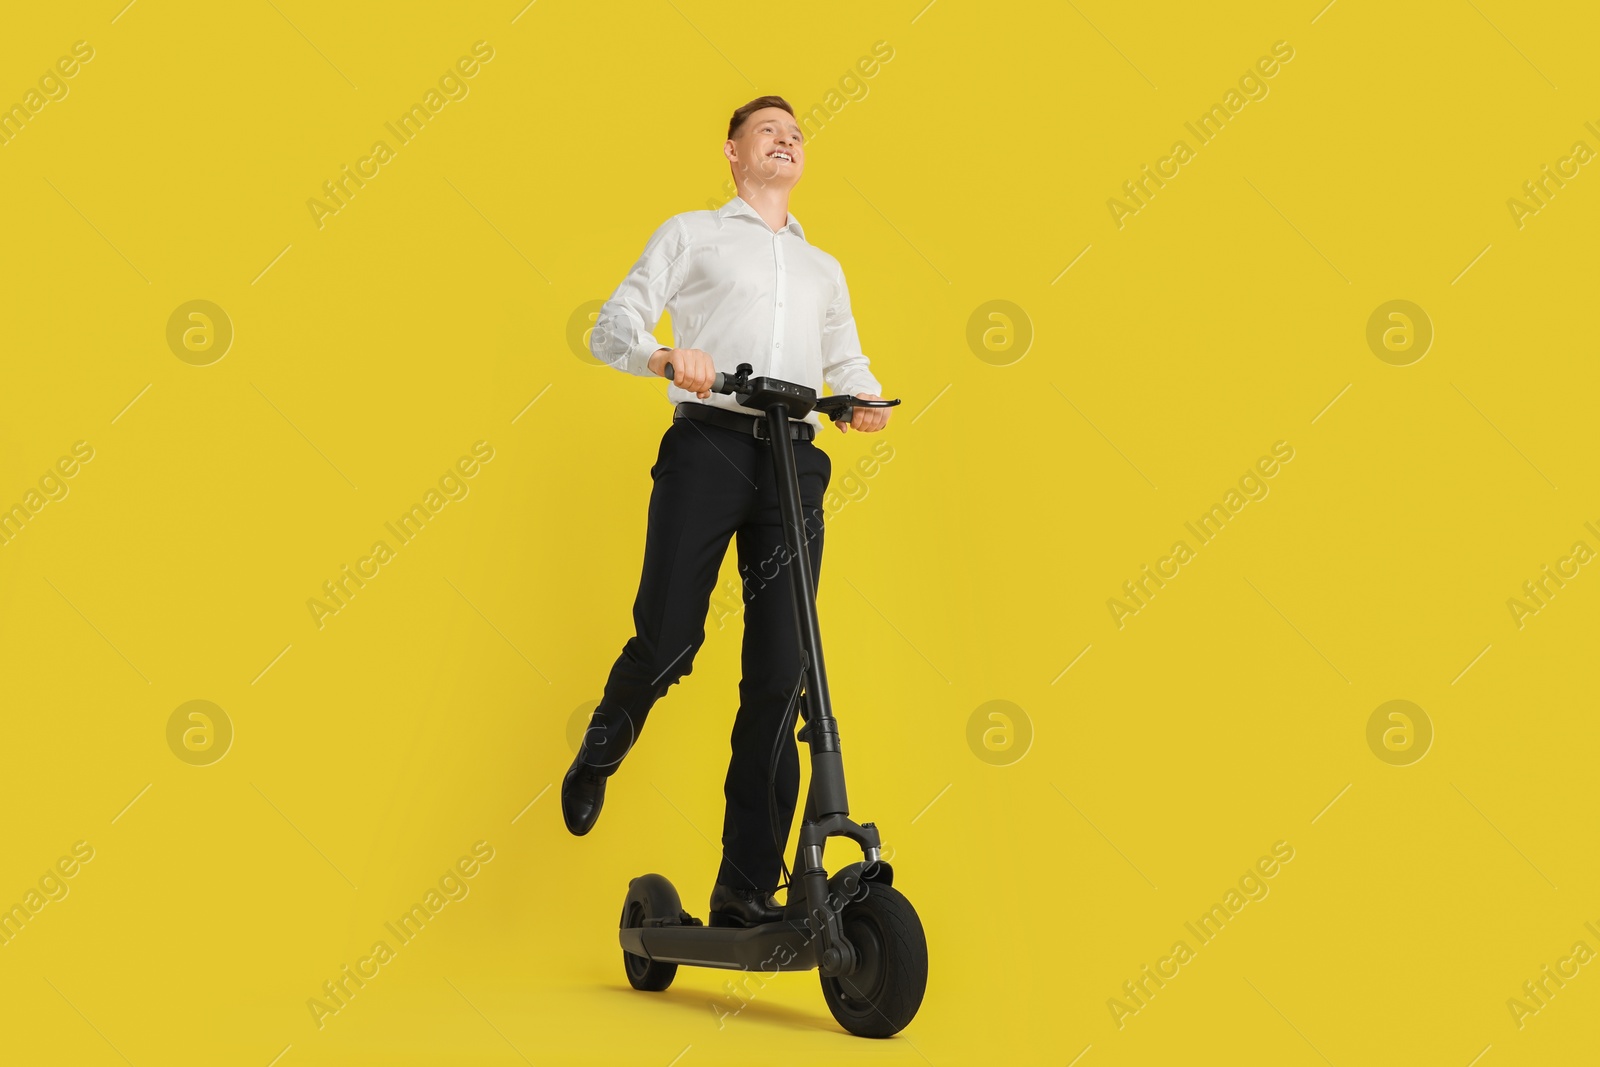 Photo of Happy man riding modern electric kick scooter on yellow background, low angle view